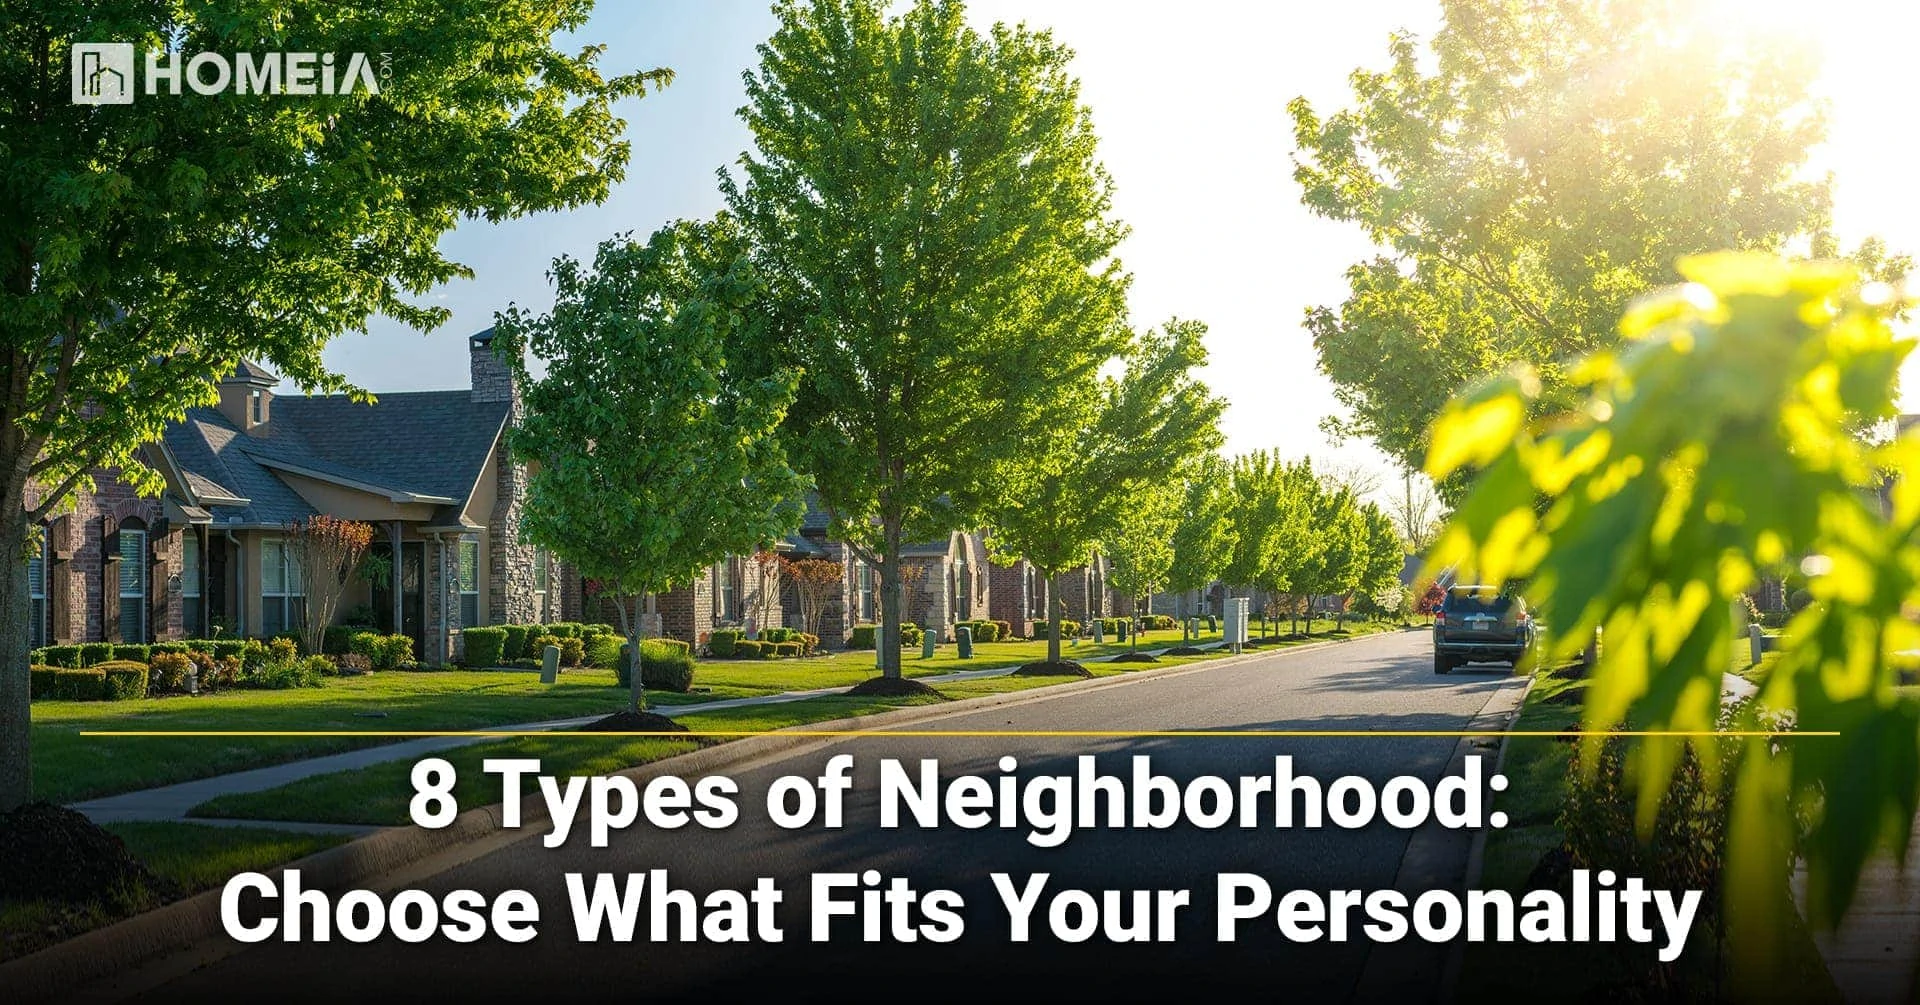 8 Types of Neighborhood: Choose What Fits Your Personality